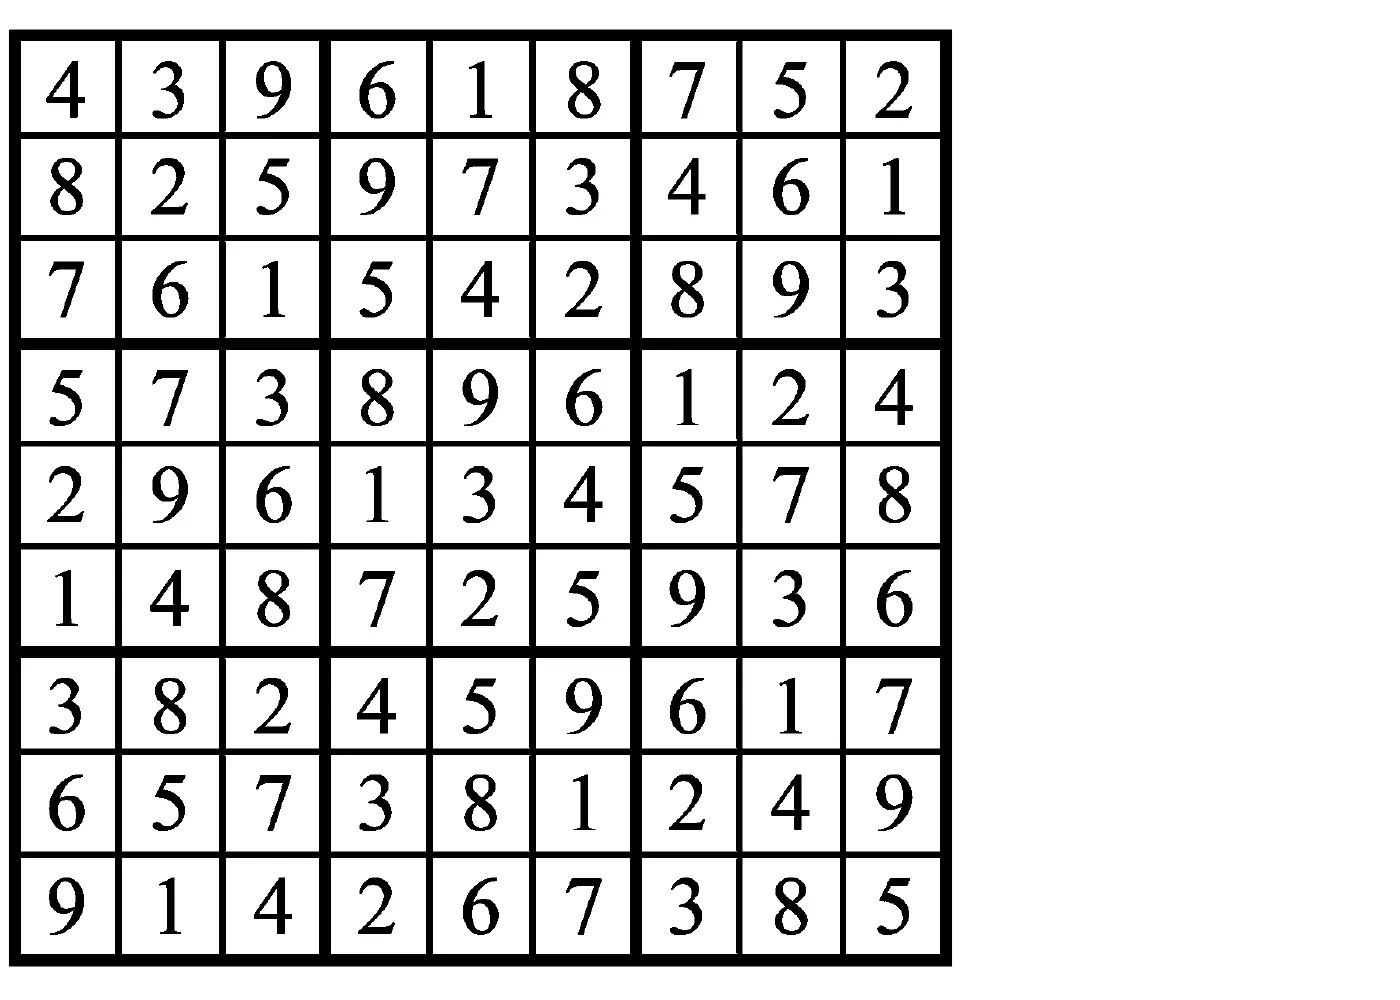 Crossword Puzzle solutions for Monday, March 6, 2023